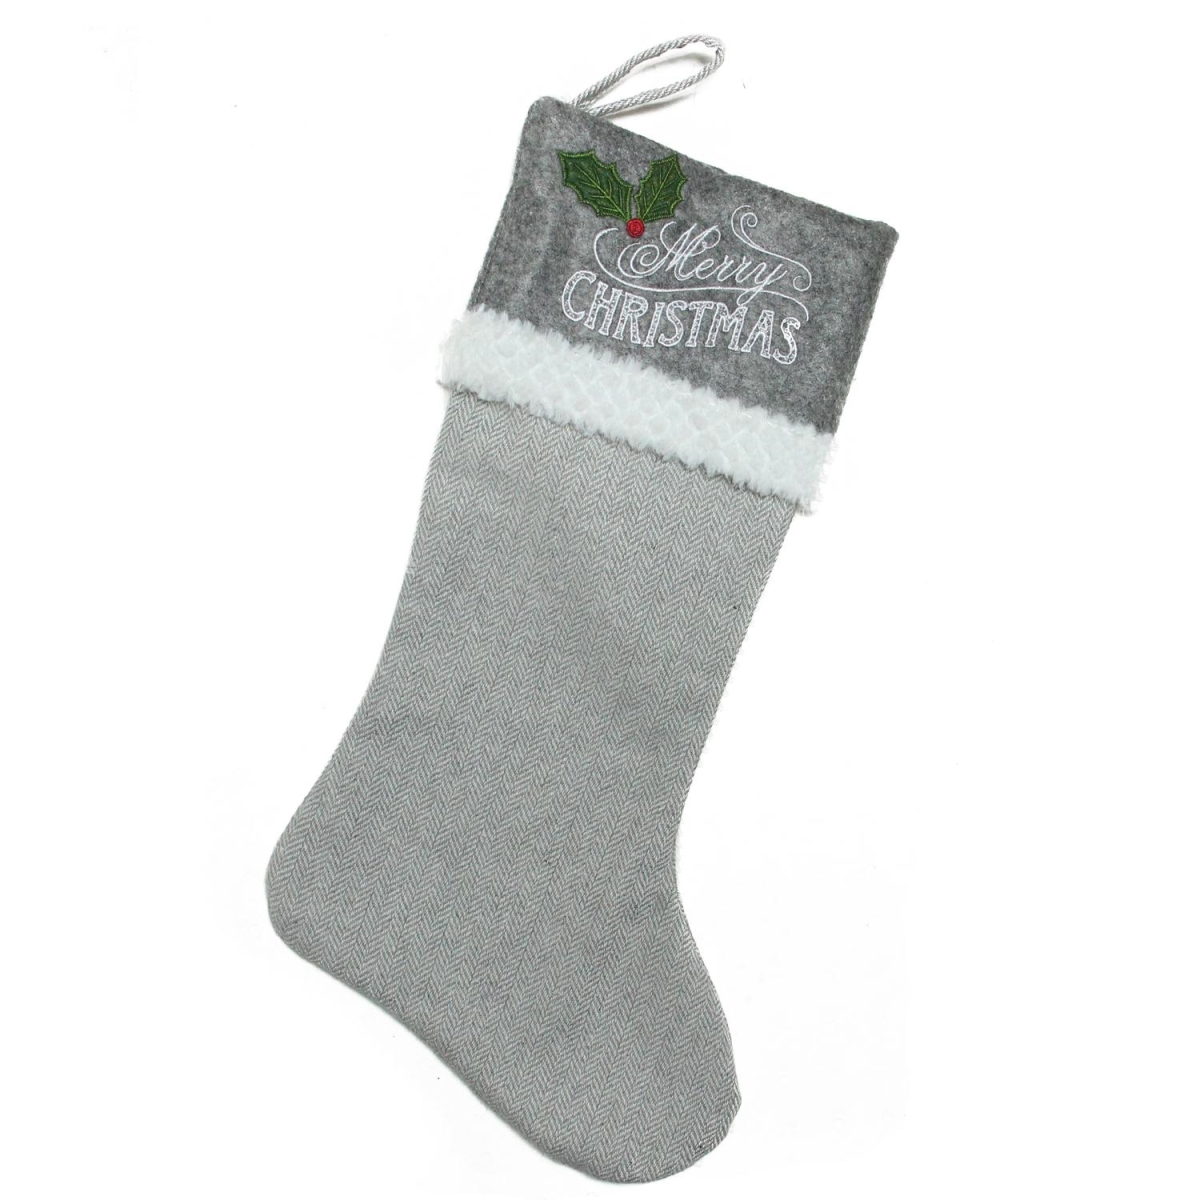 32629162 21 In. Gray & White Merry Christmas Herringbone Patterned With Felt Cuff Christmas Stocking